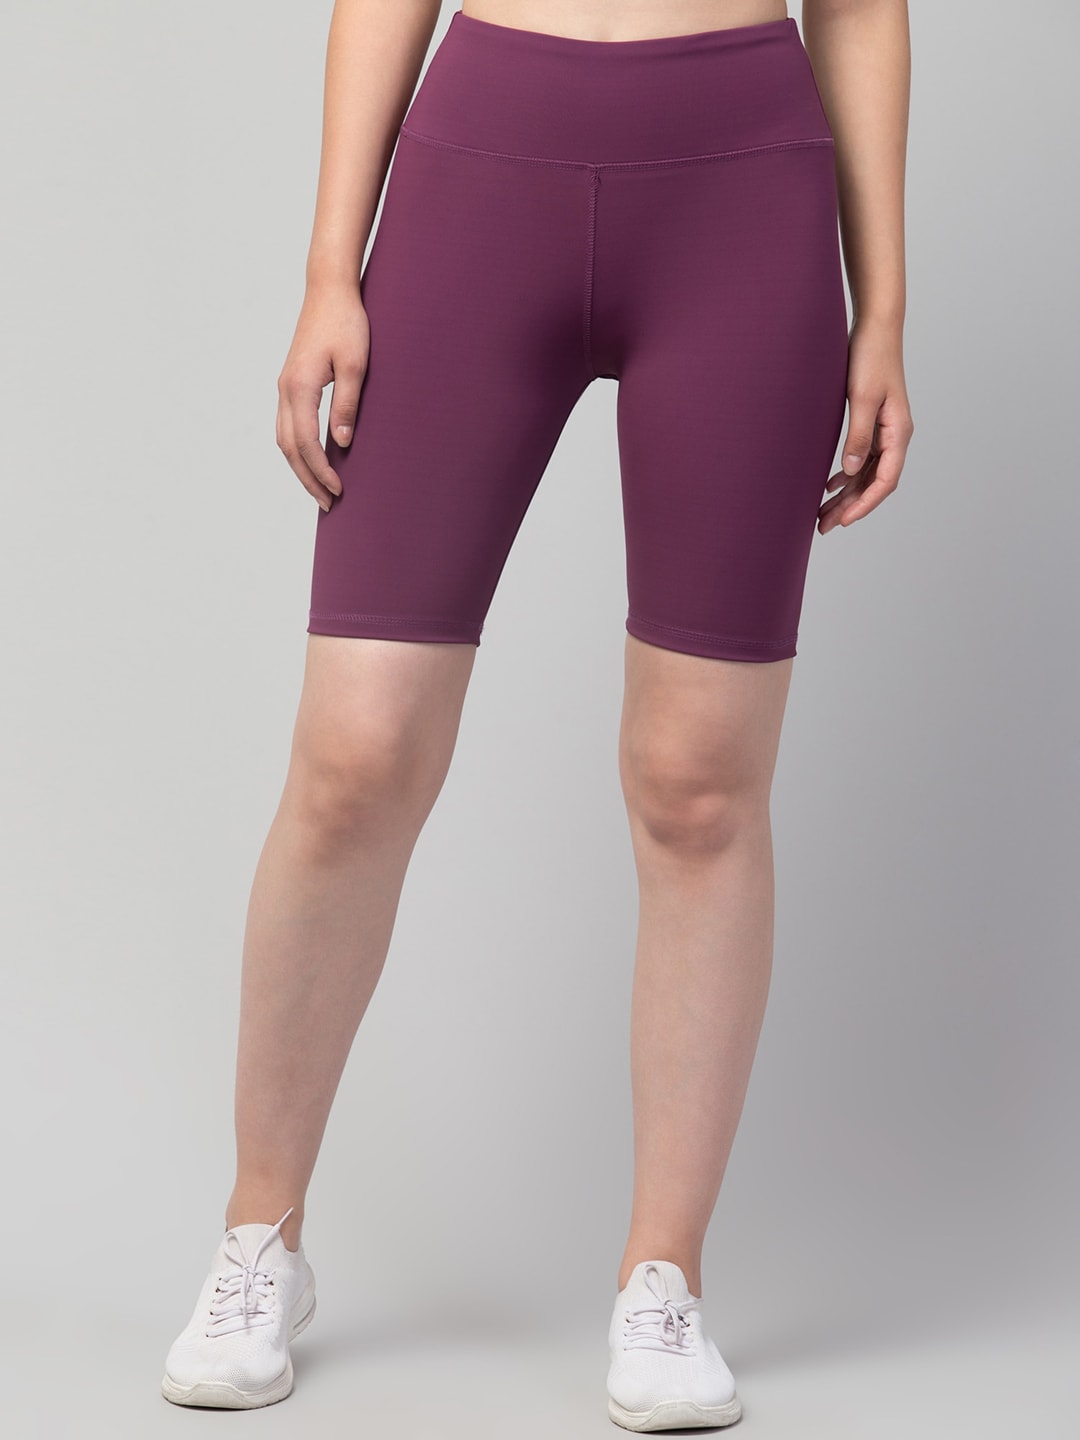 Apraa & Parma Women Purple Skinny Fit Cycling Sports Shorts Price in India